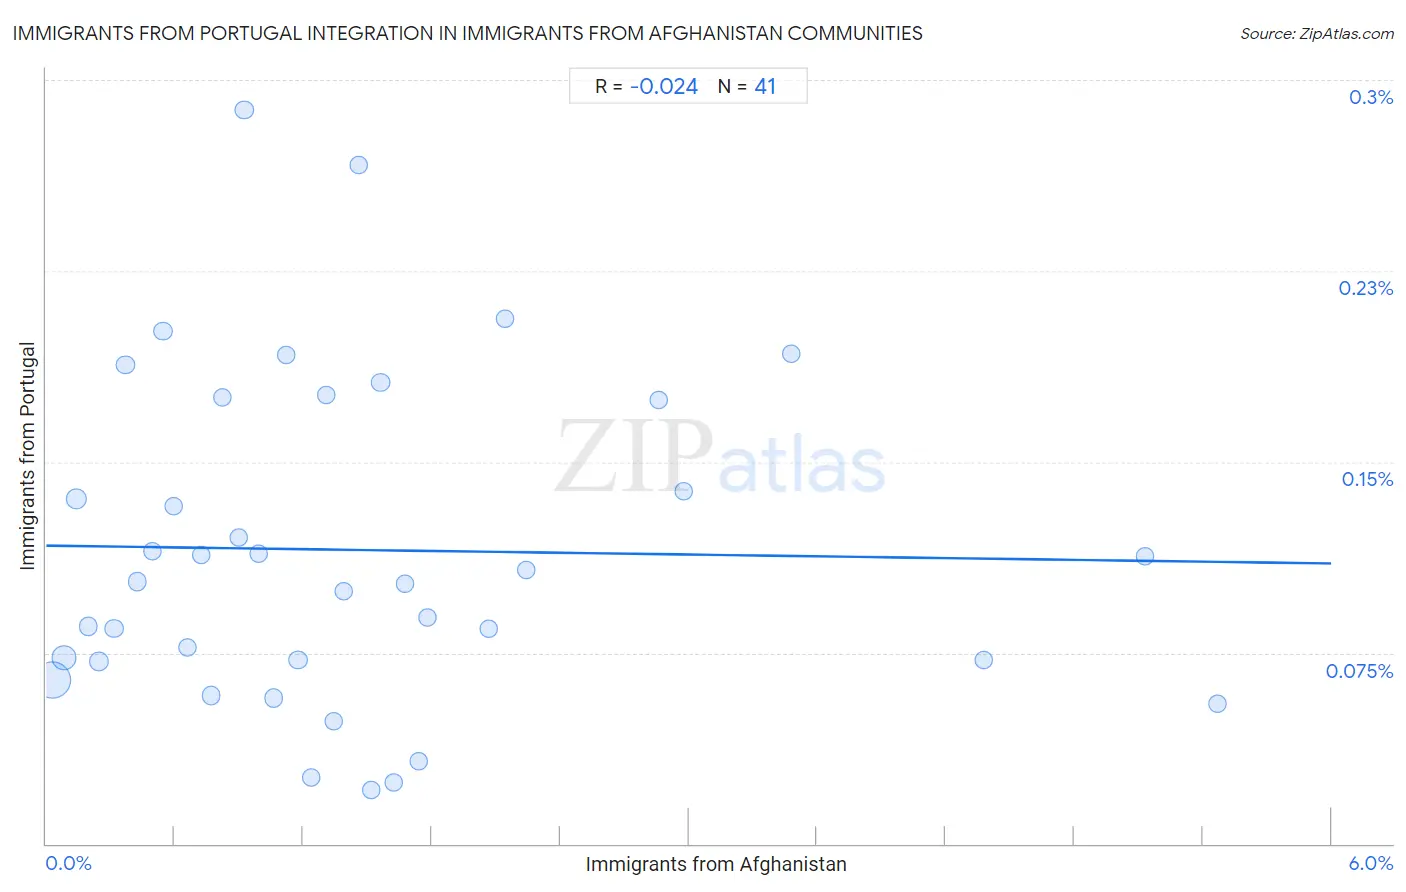 Immigrants from Afghanistan Integration in Immigrants from Portugal Communities